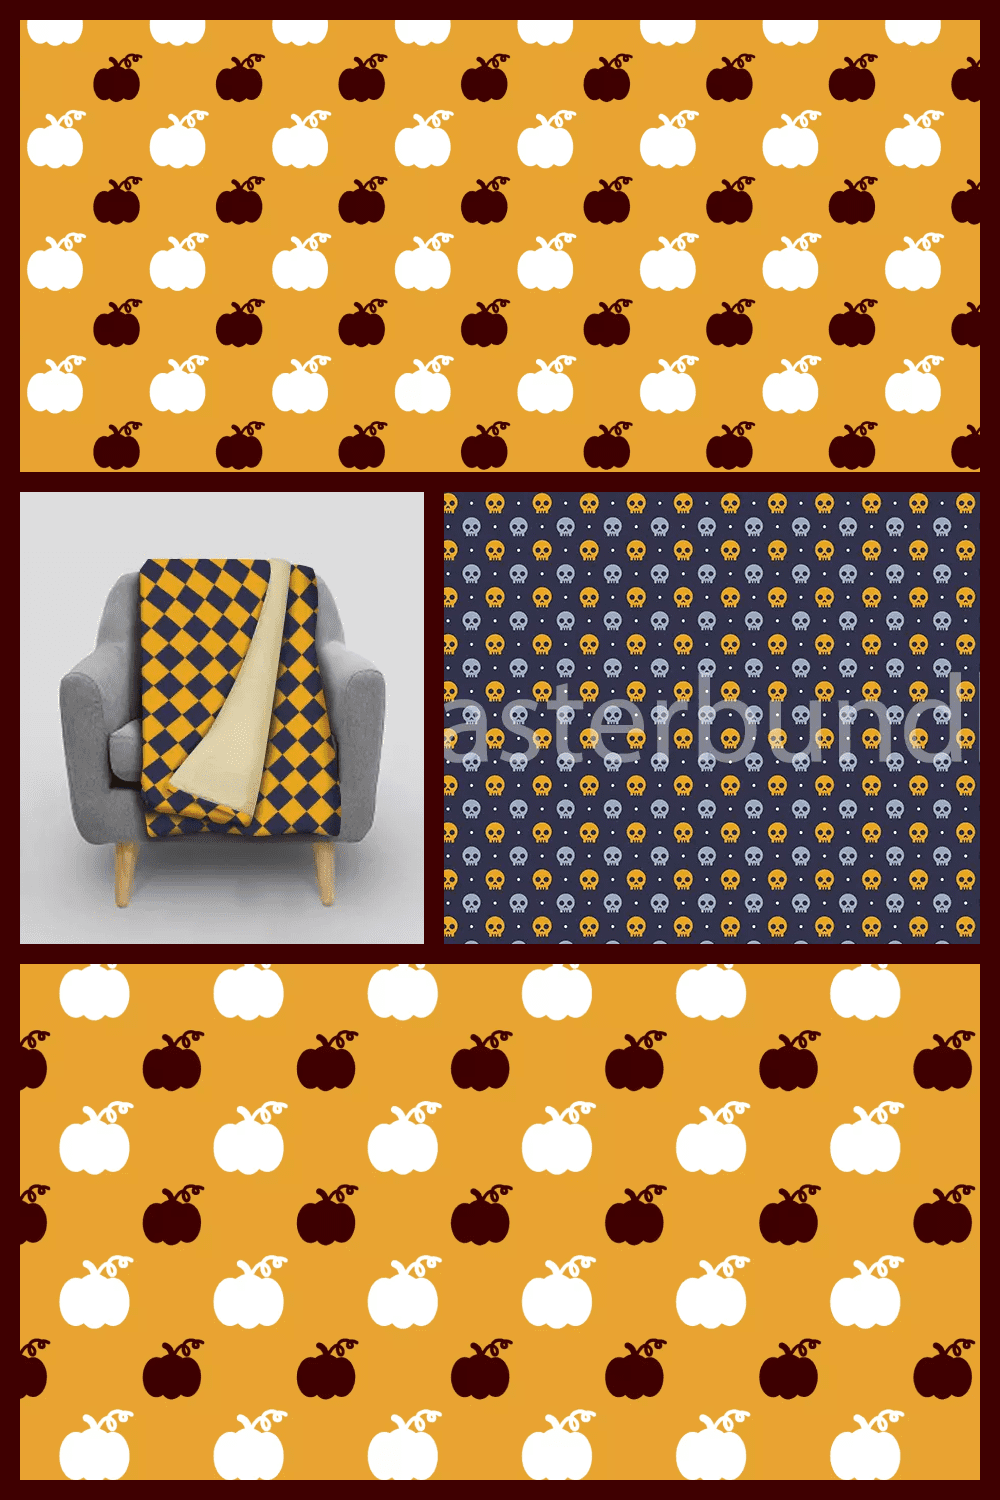 Wrapping paper with pumpkins and skulls on orange and blue background.